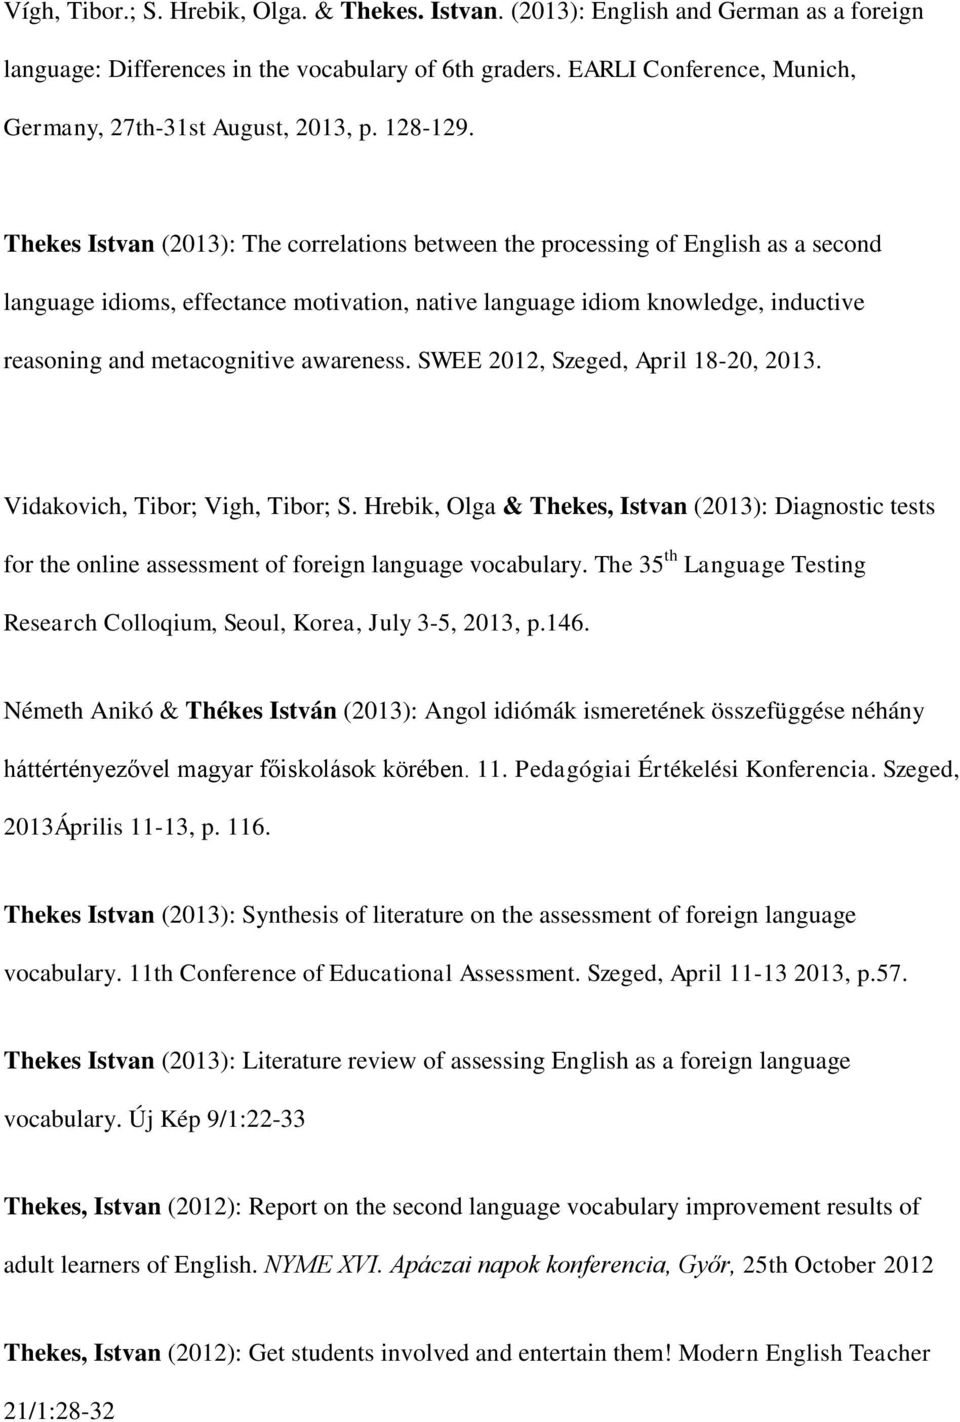 Thekes Istvan (2013): The correlations between the processing of English as a second language idioms, effectance motivation, native language idiom knowledge, inductive reasoning and metacognitive